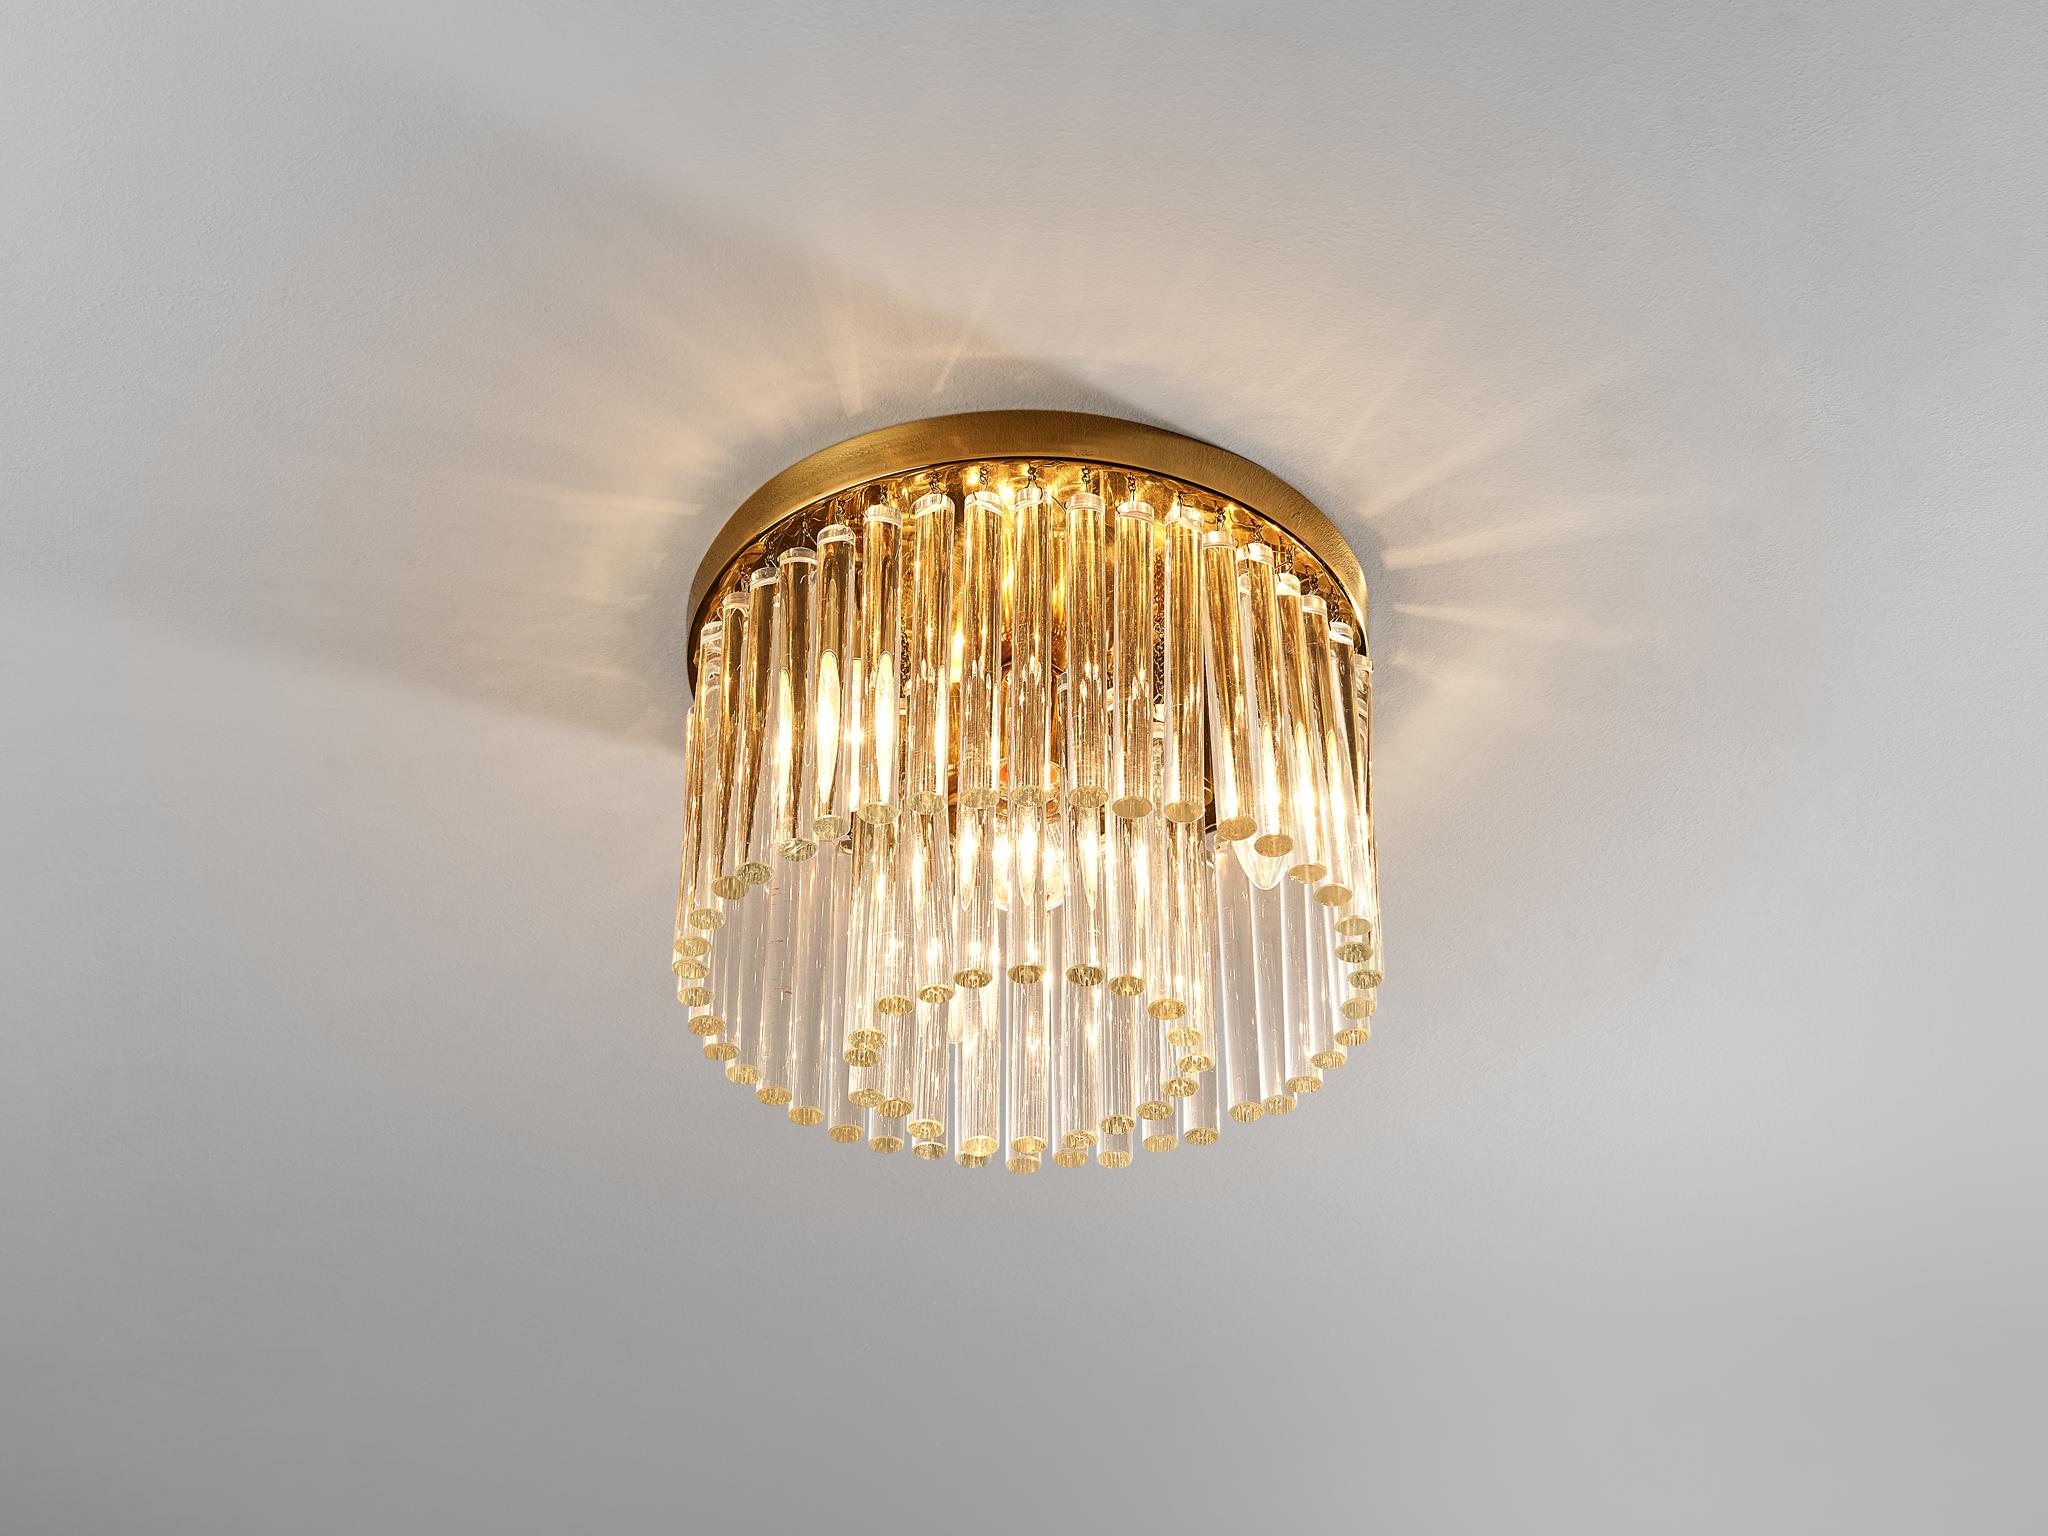 Ceiling light, glass, brass, Italy, 1950s.

An exceptional crafted chandelier of Italian origin. The design features a round canopy executed in brass and adorned with glass prisms arranged in two rows. All together creating a spectacular sight by